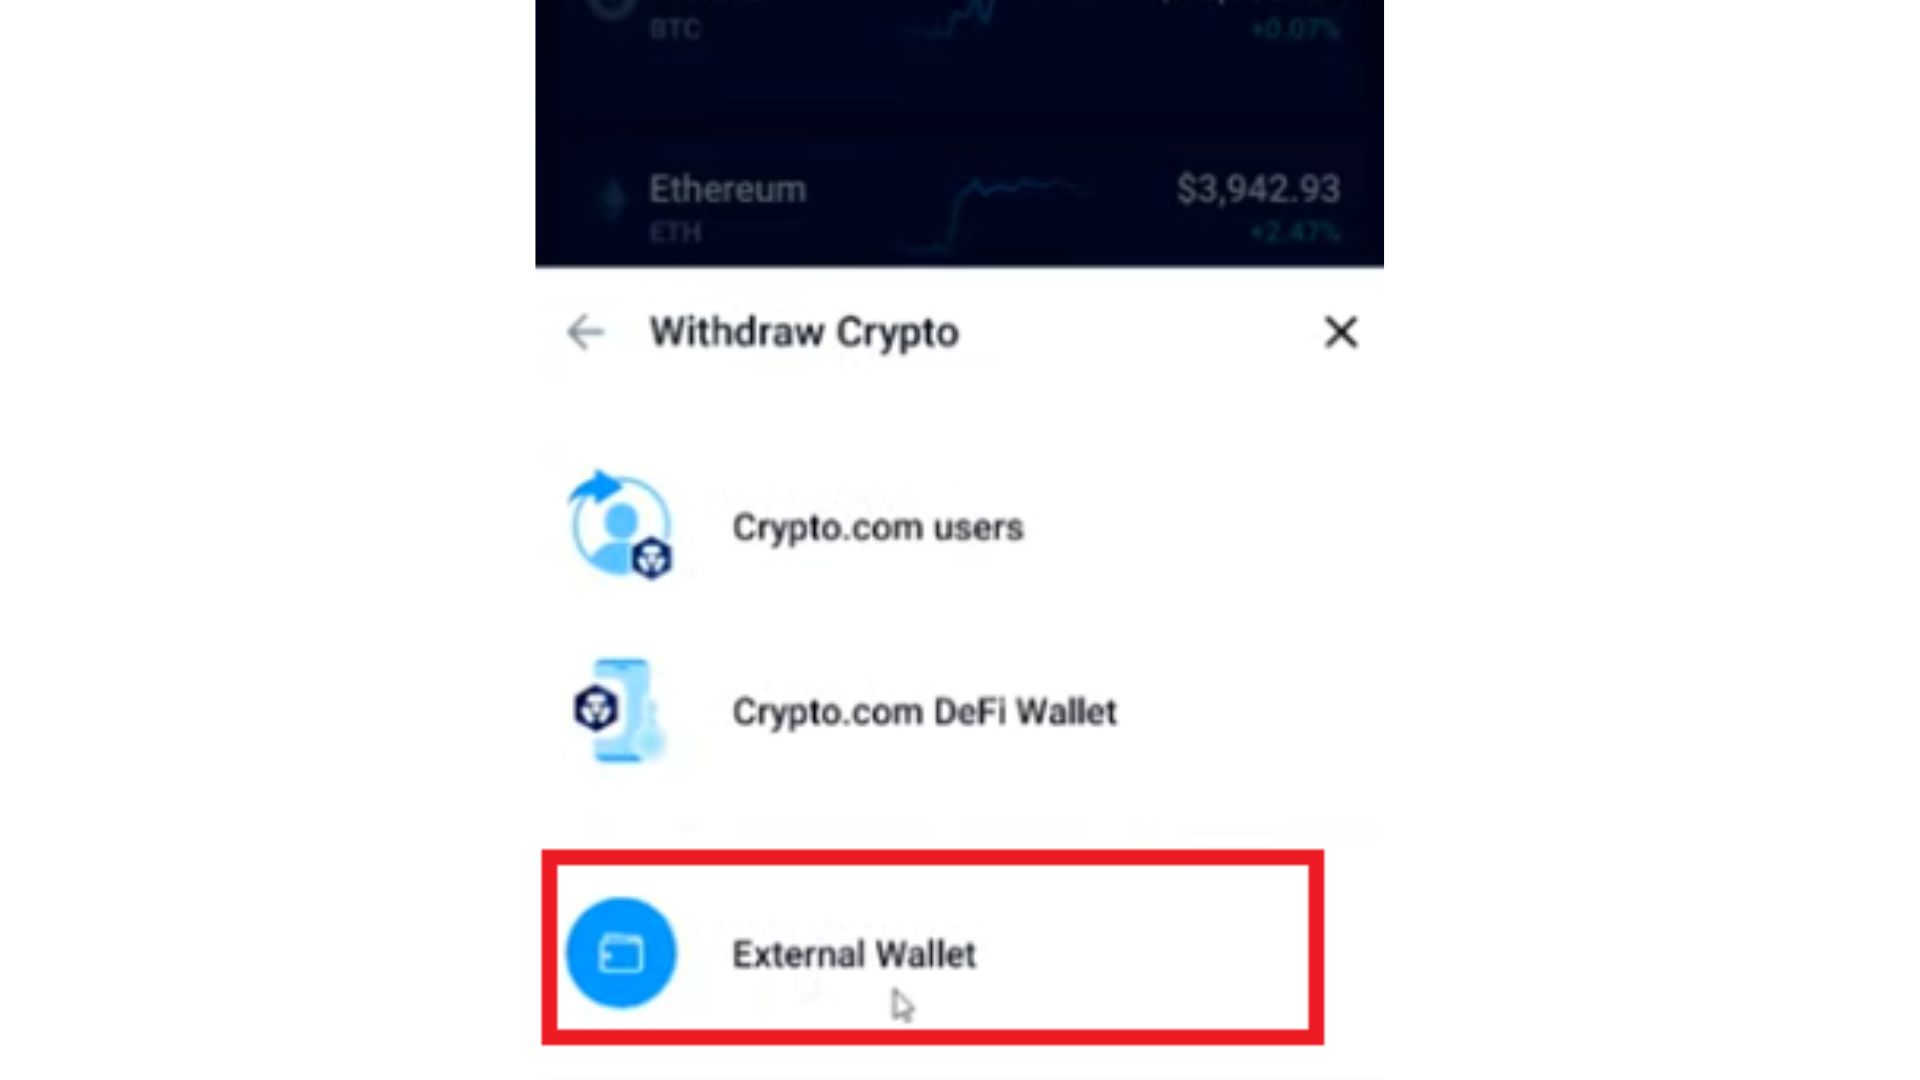 Select "Withdraw to External Wallet"